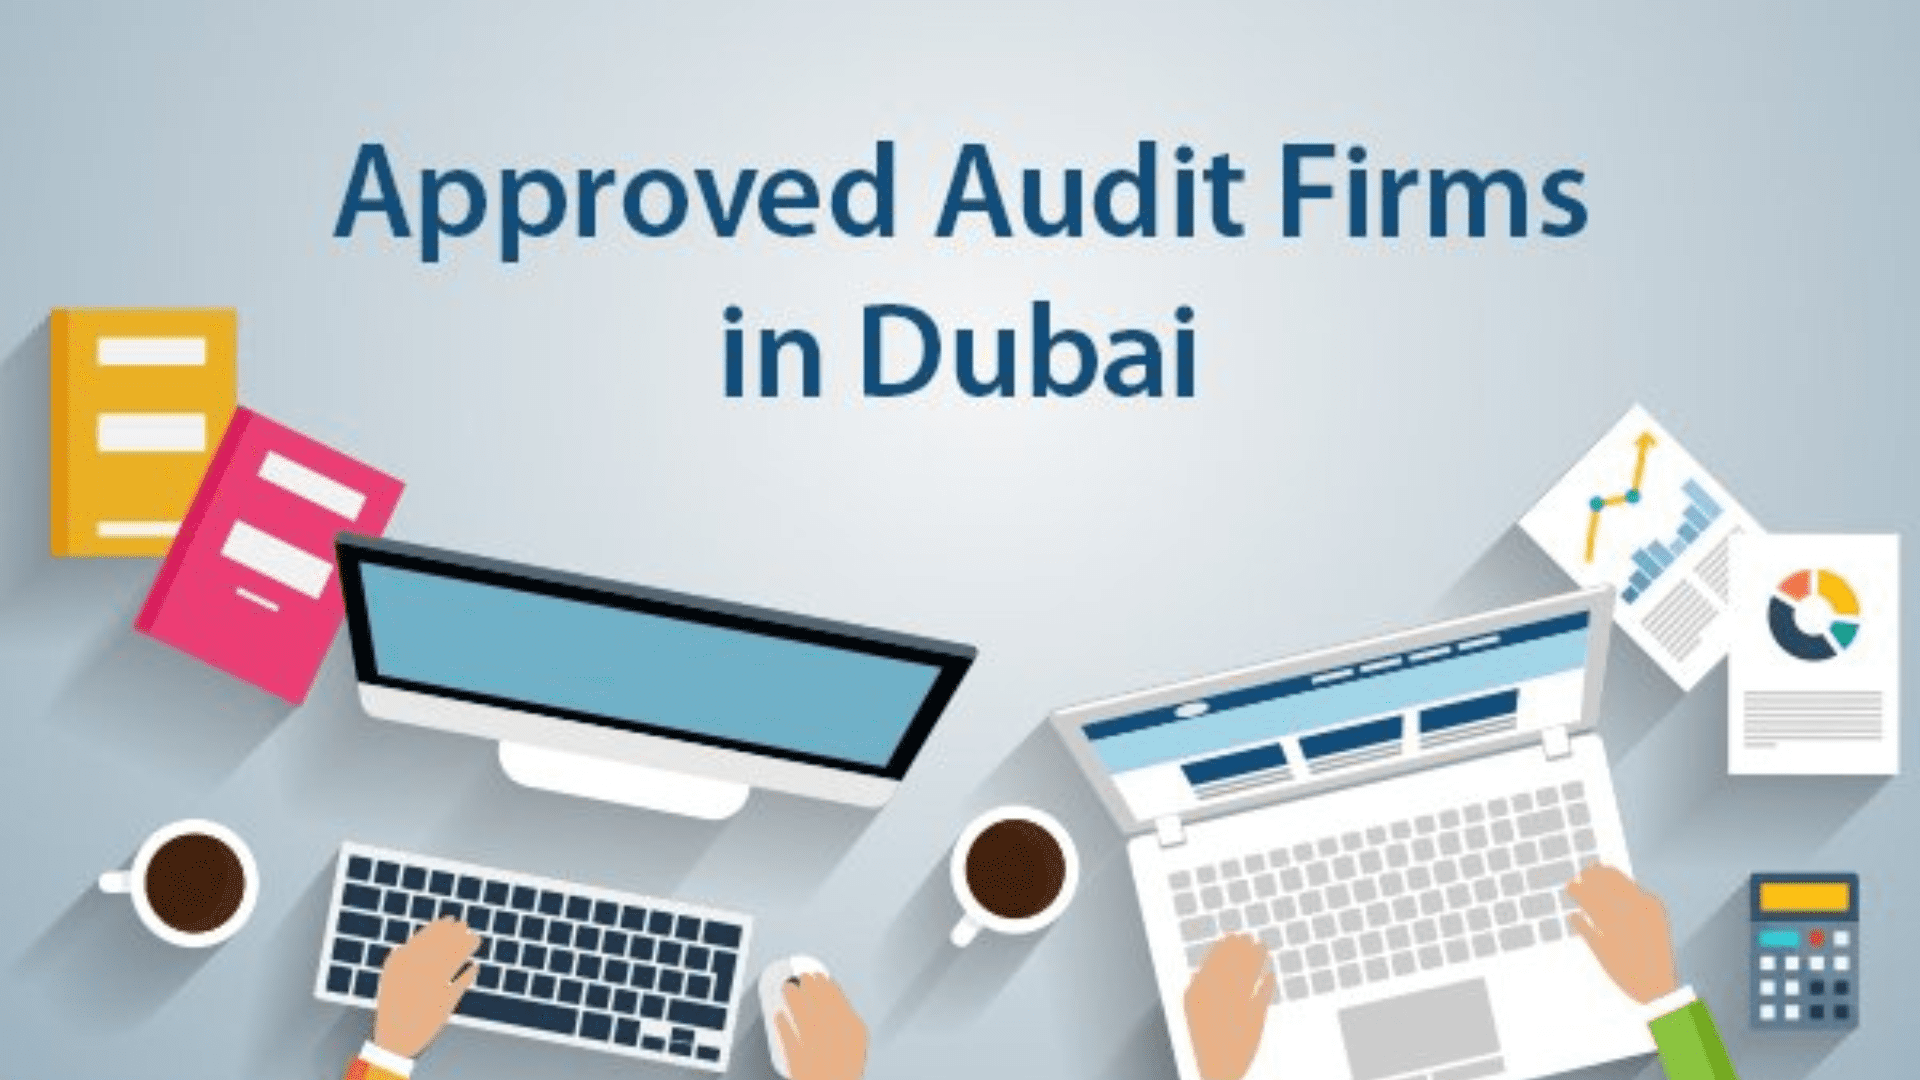 The Benefits of Outsourcing Audit Services in Dubai